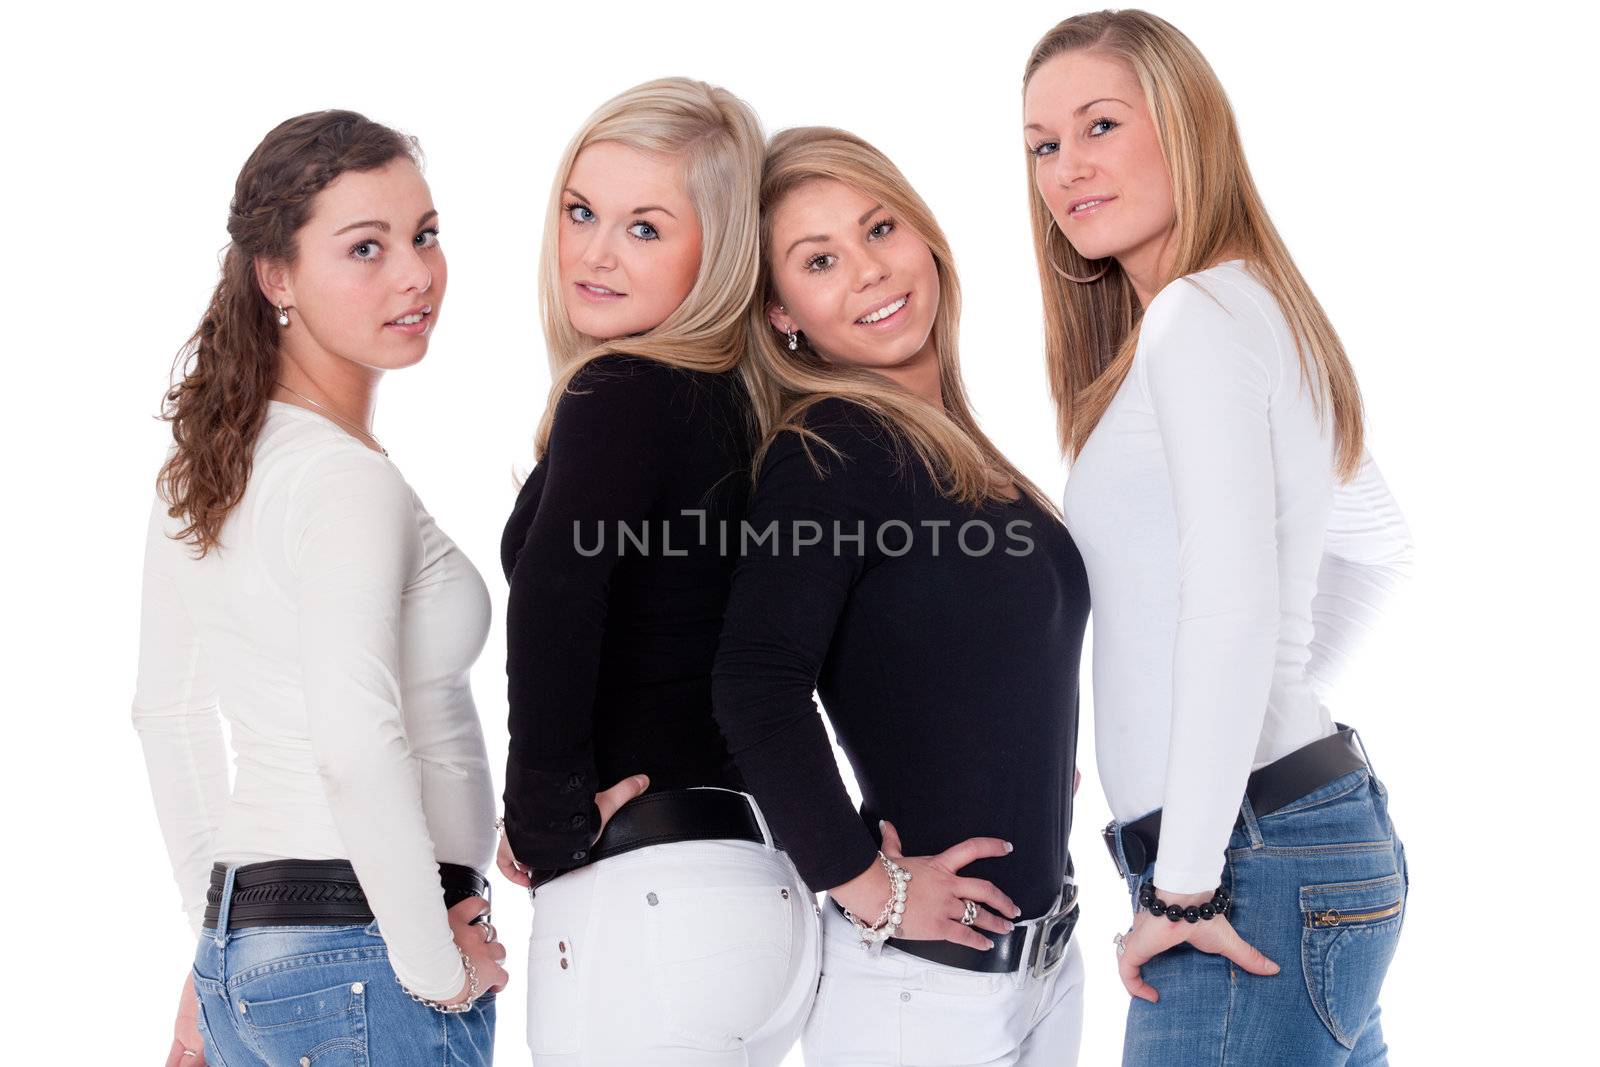 Group of young girlfriends having a happy time together